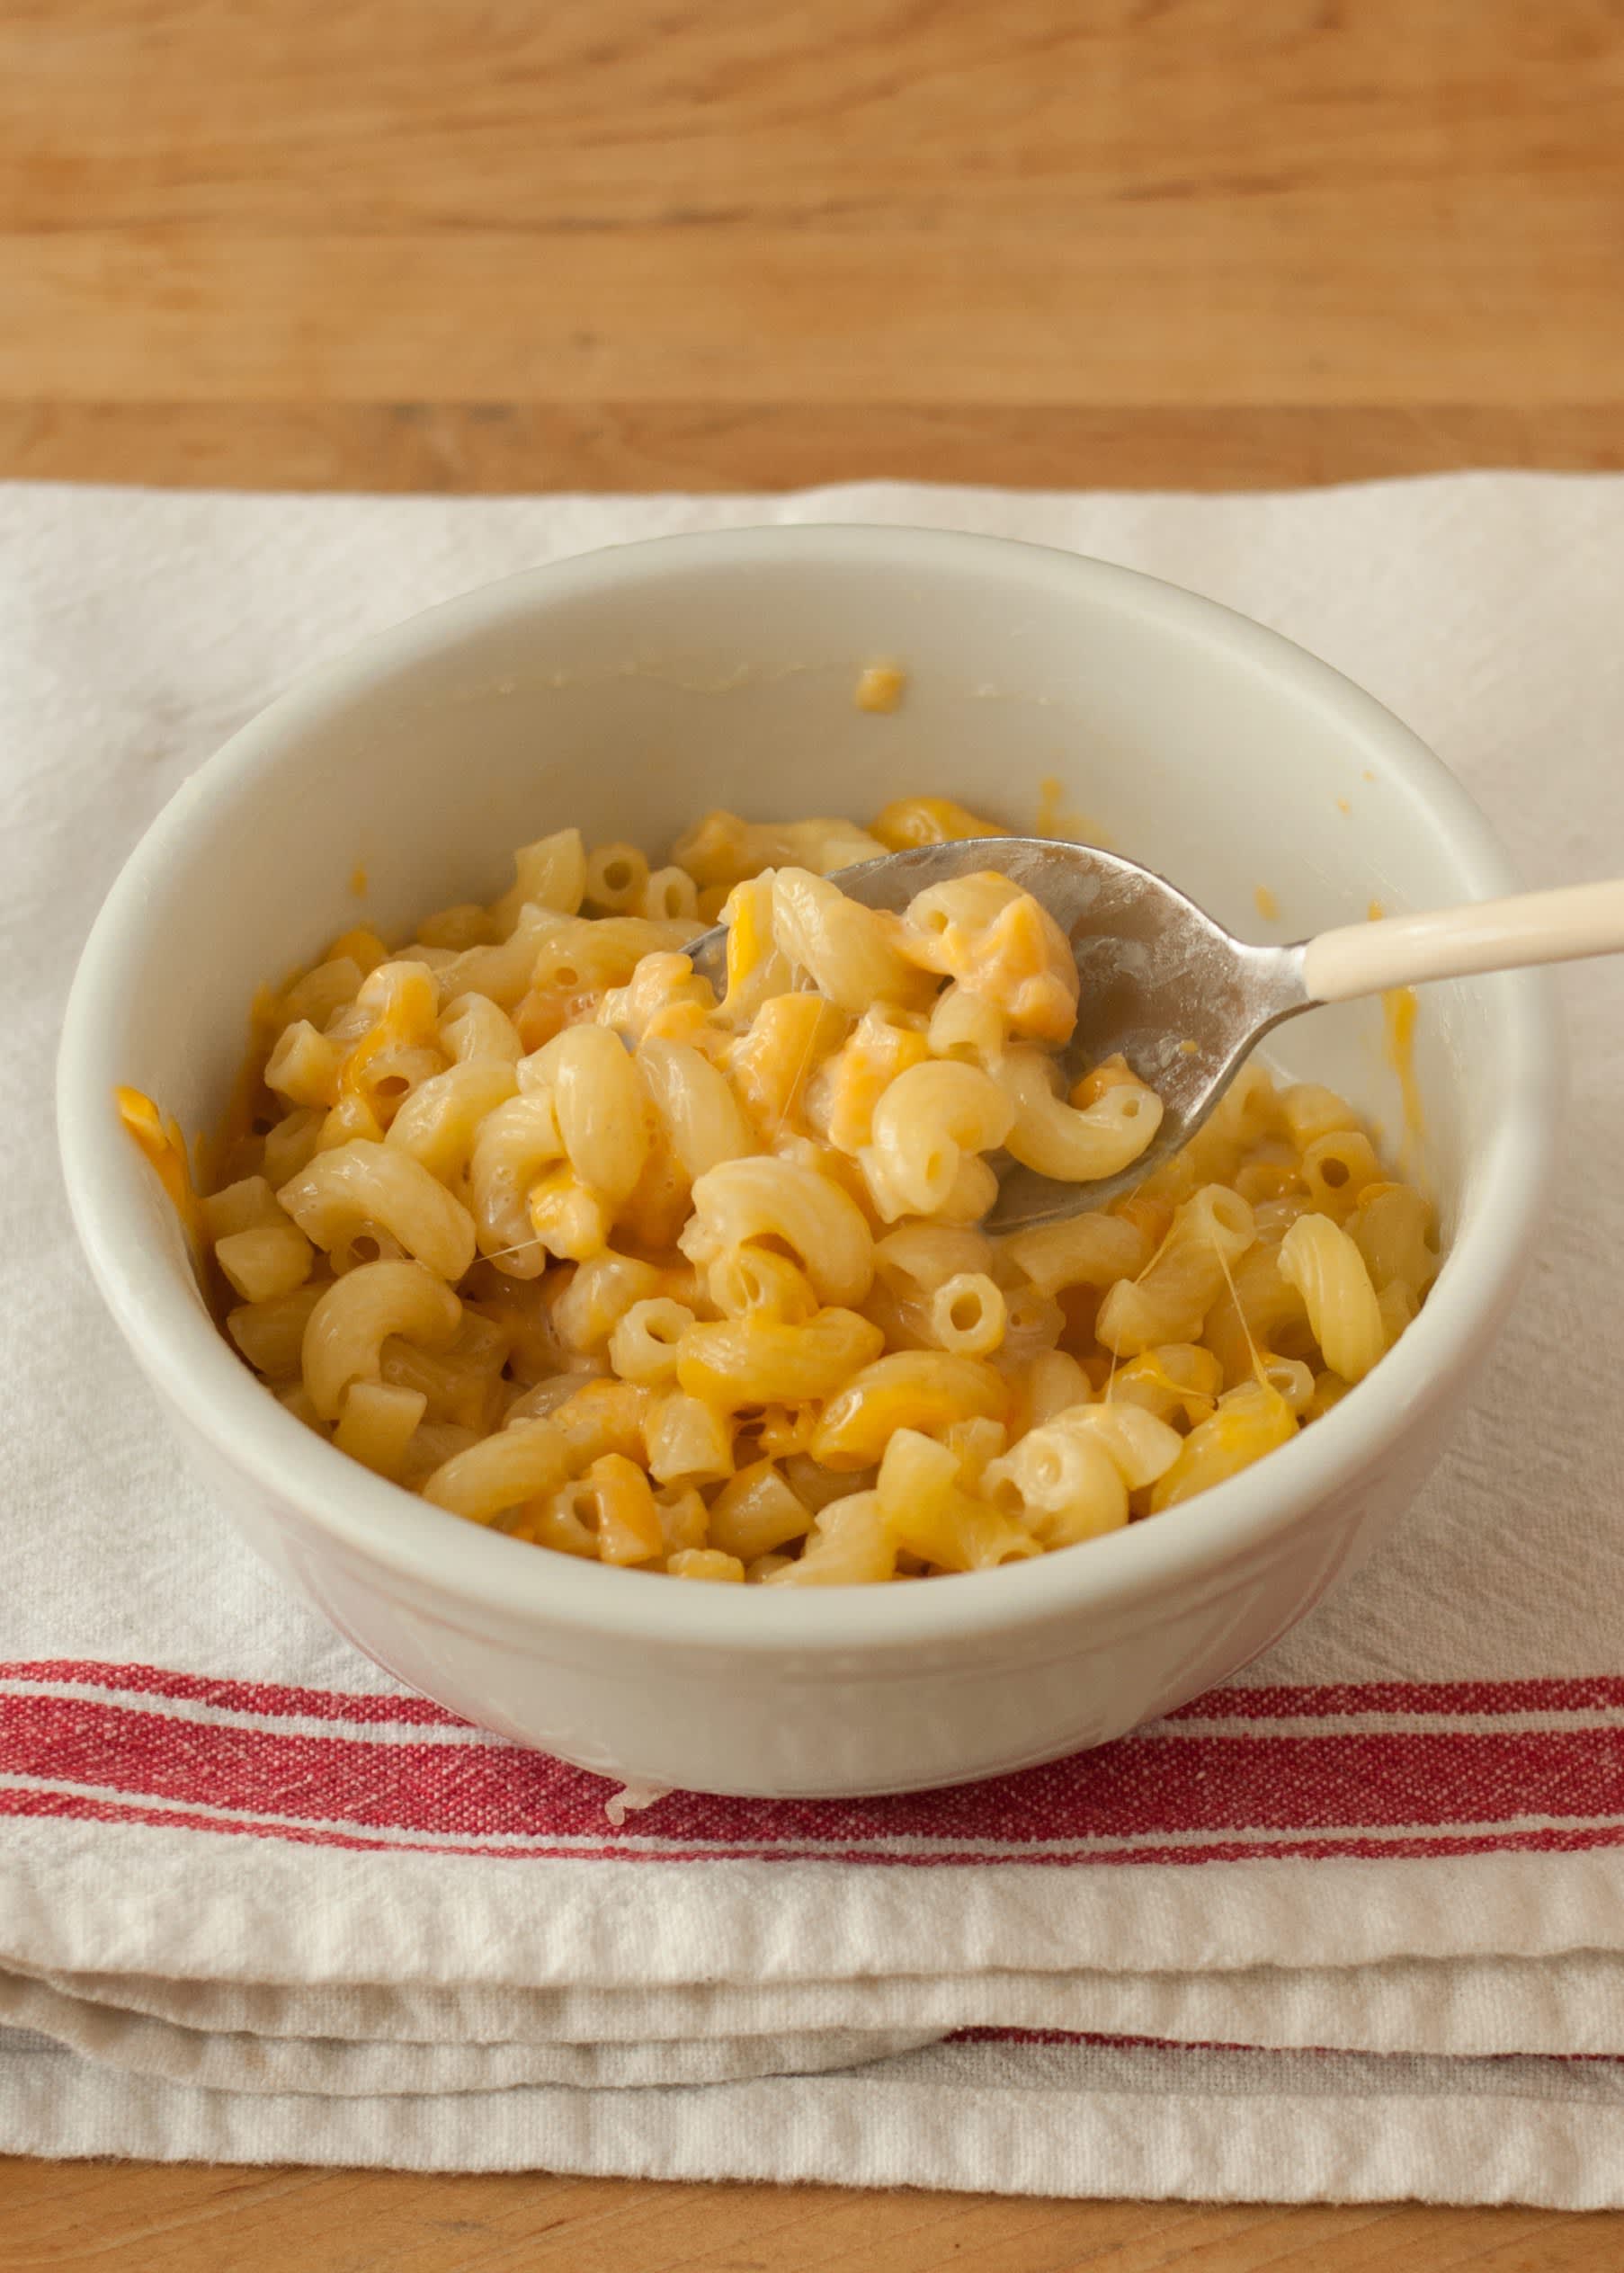 How To Make One-Bowl Microwave Mac and Cheese | Kitchn